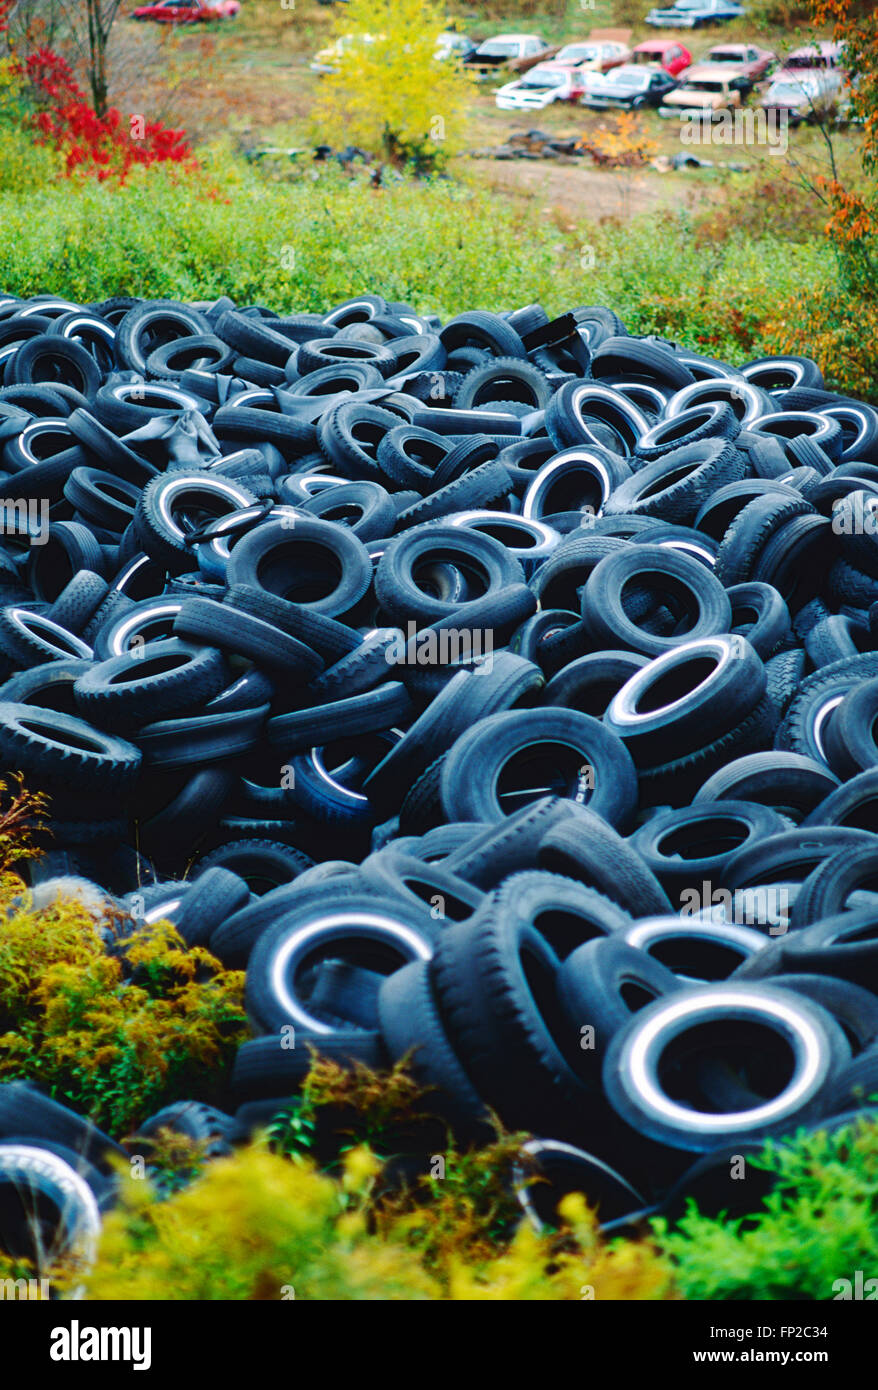 Old used automobile tires in landfill Stock Photo